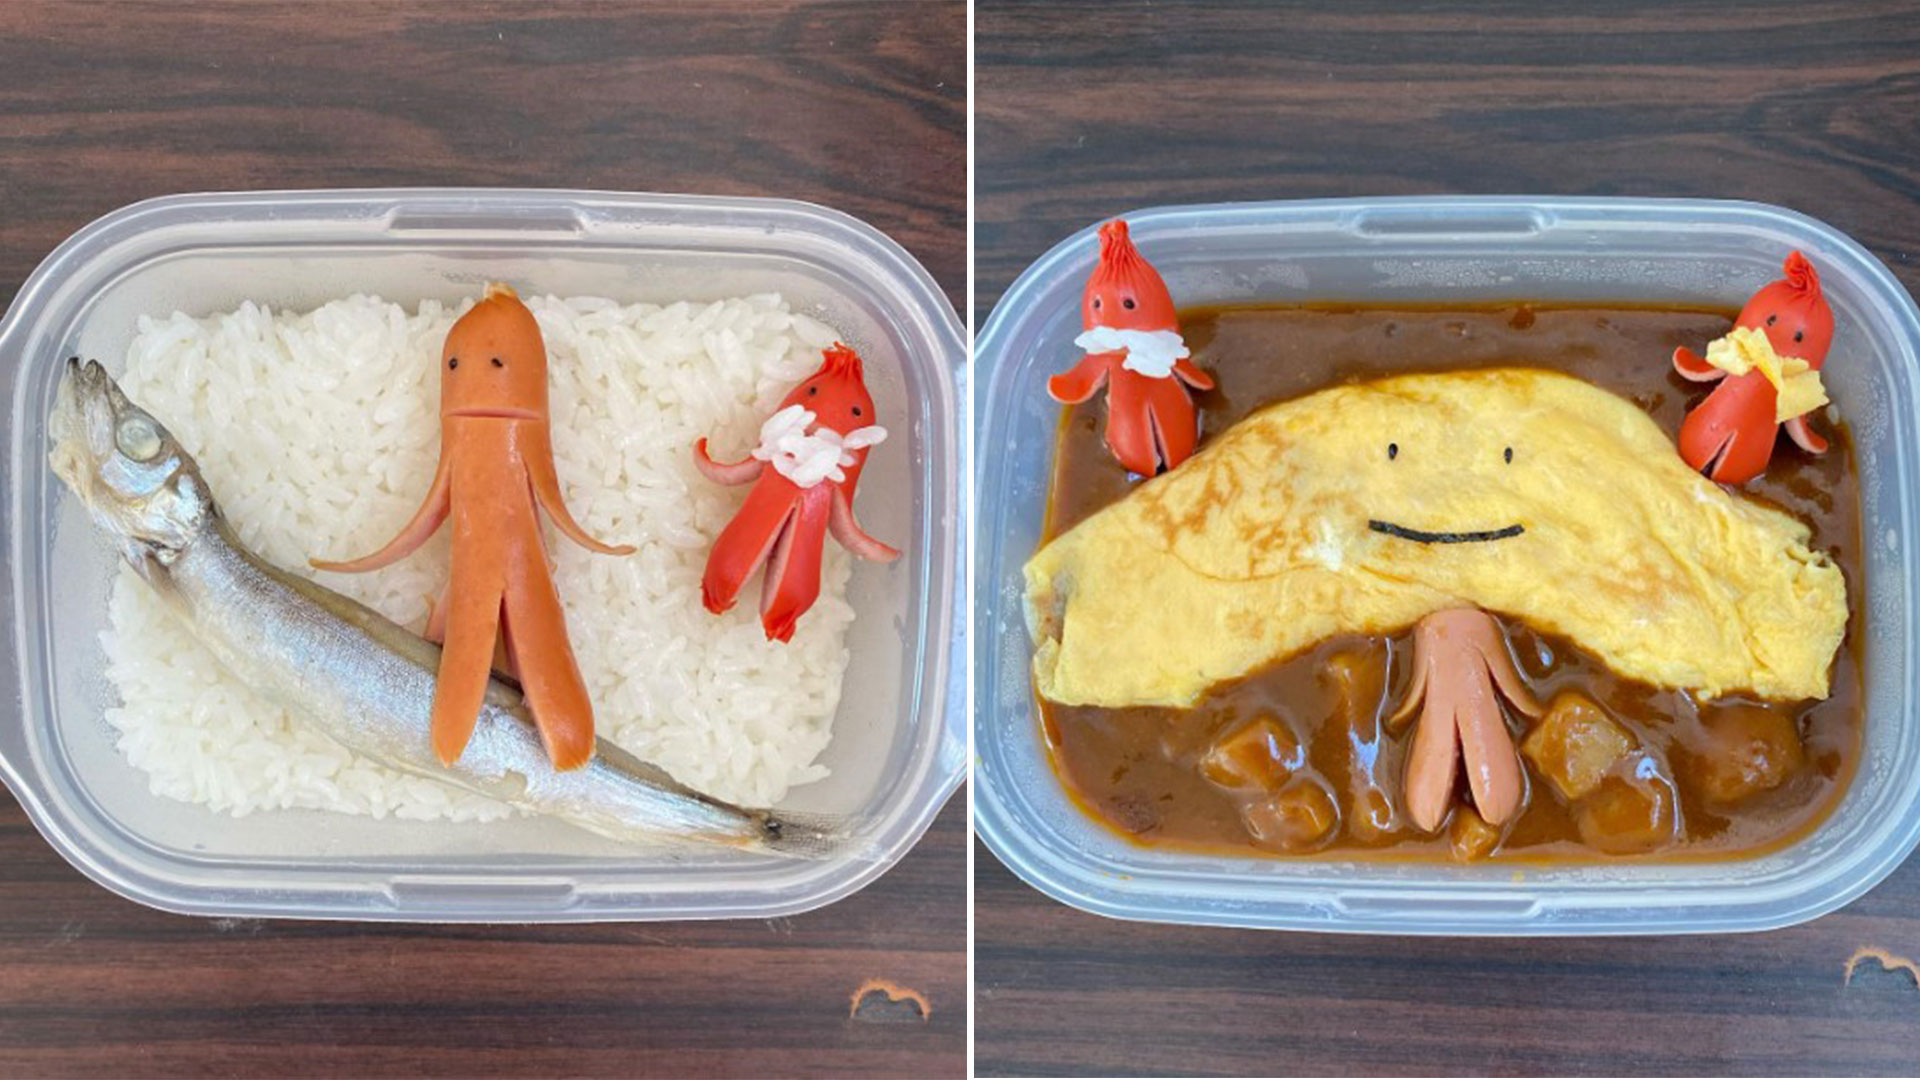 https://onecms-res.cloudinary.com/image/upload/v1668000279/mediacorp/8days/image/2022/11/09/japanese-man-finds-online-fame-by-posting-daily-ugly-homemade-bento-photos.jpg